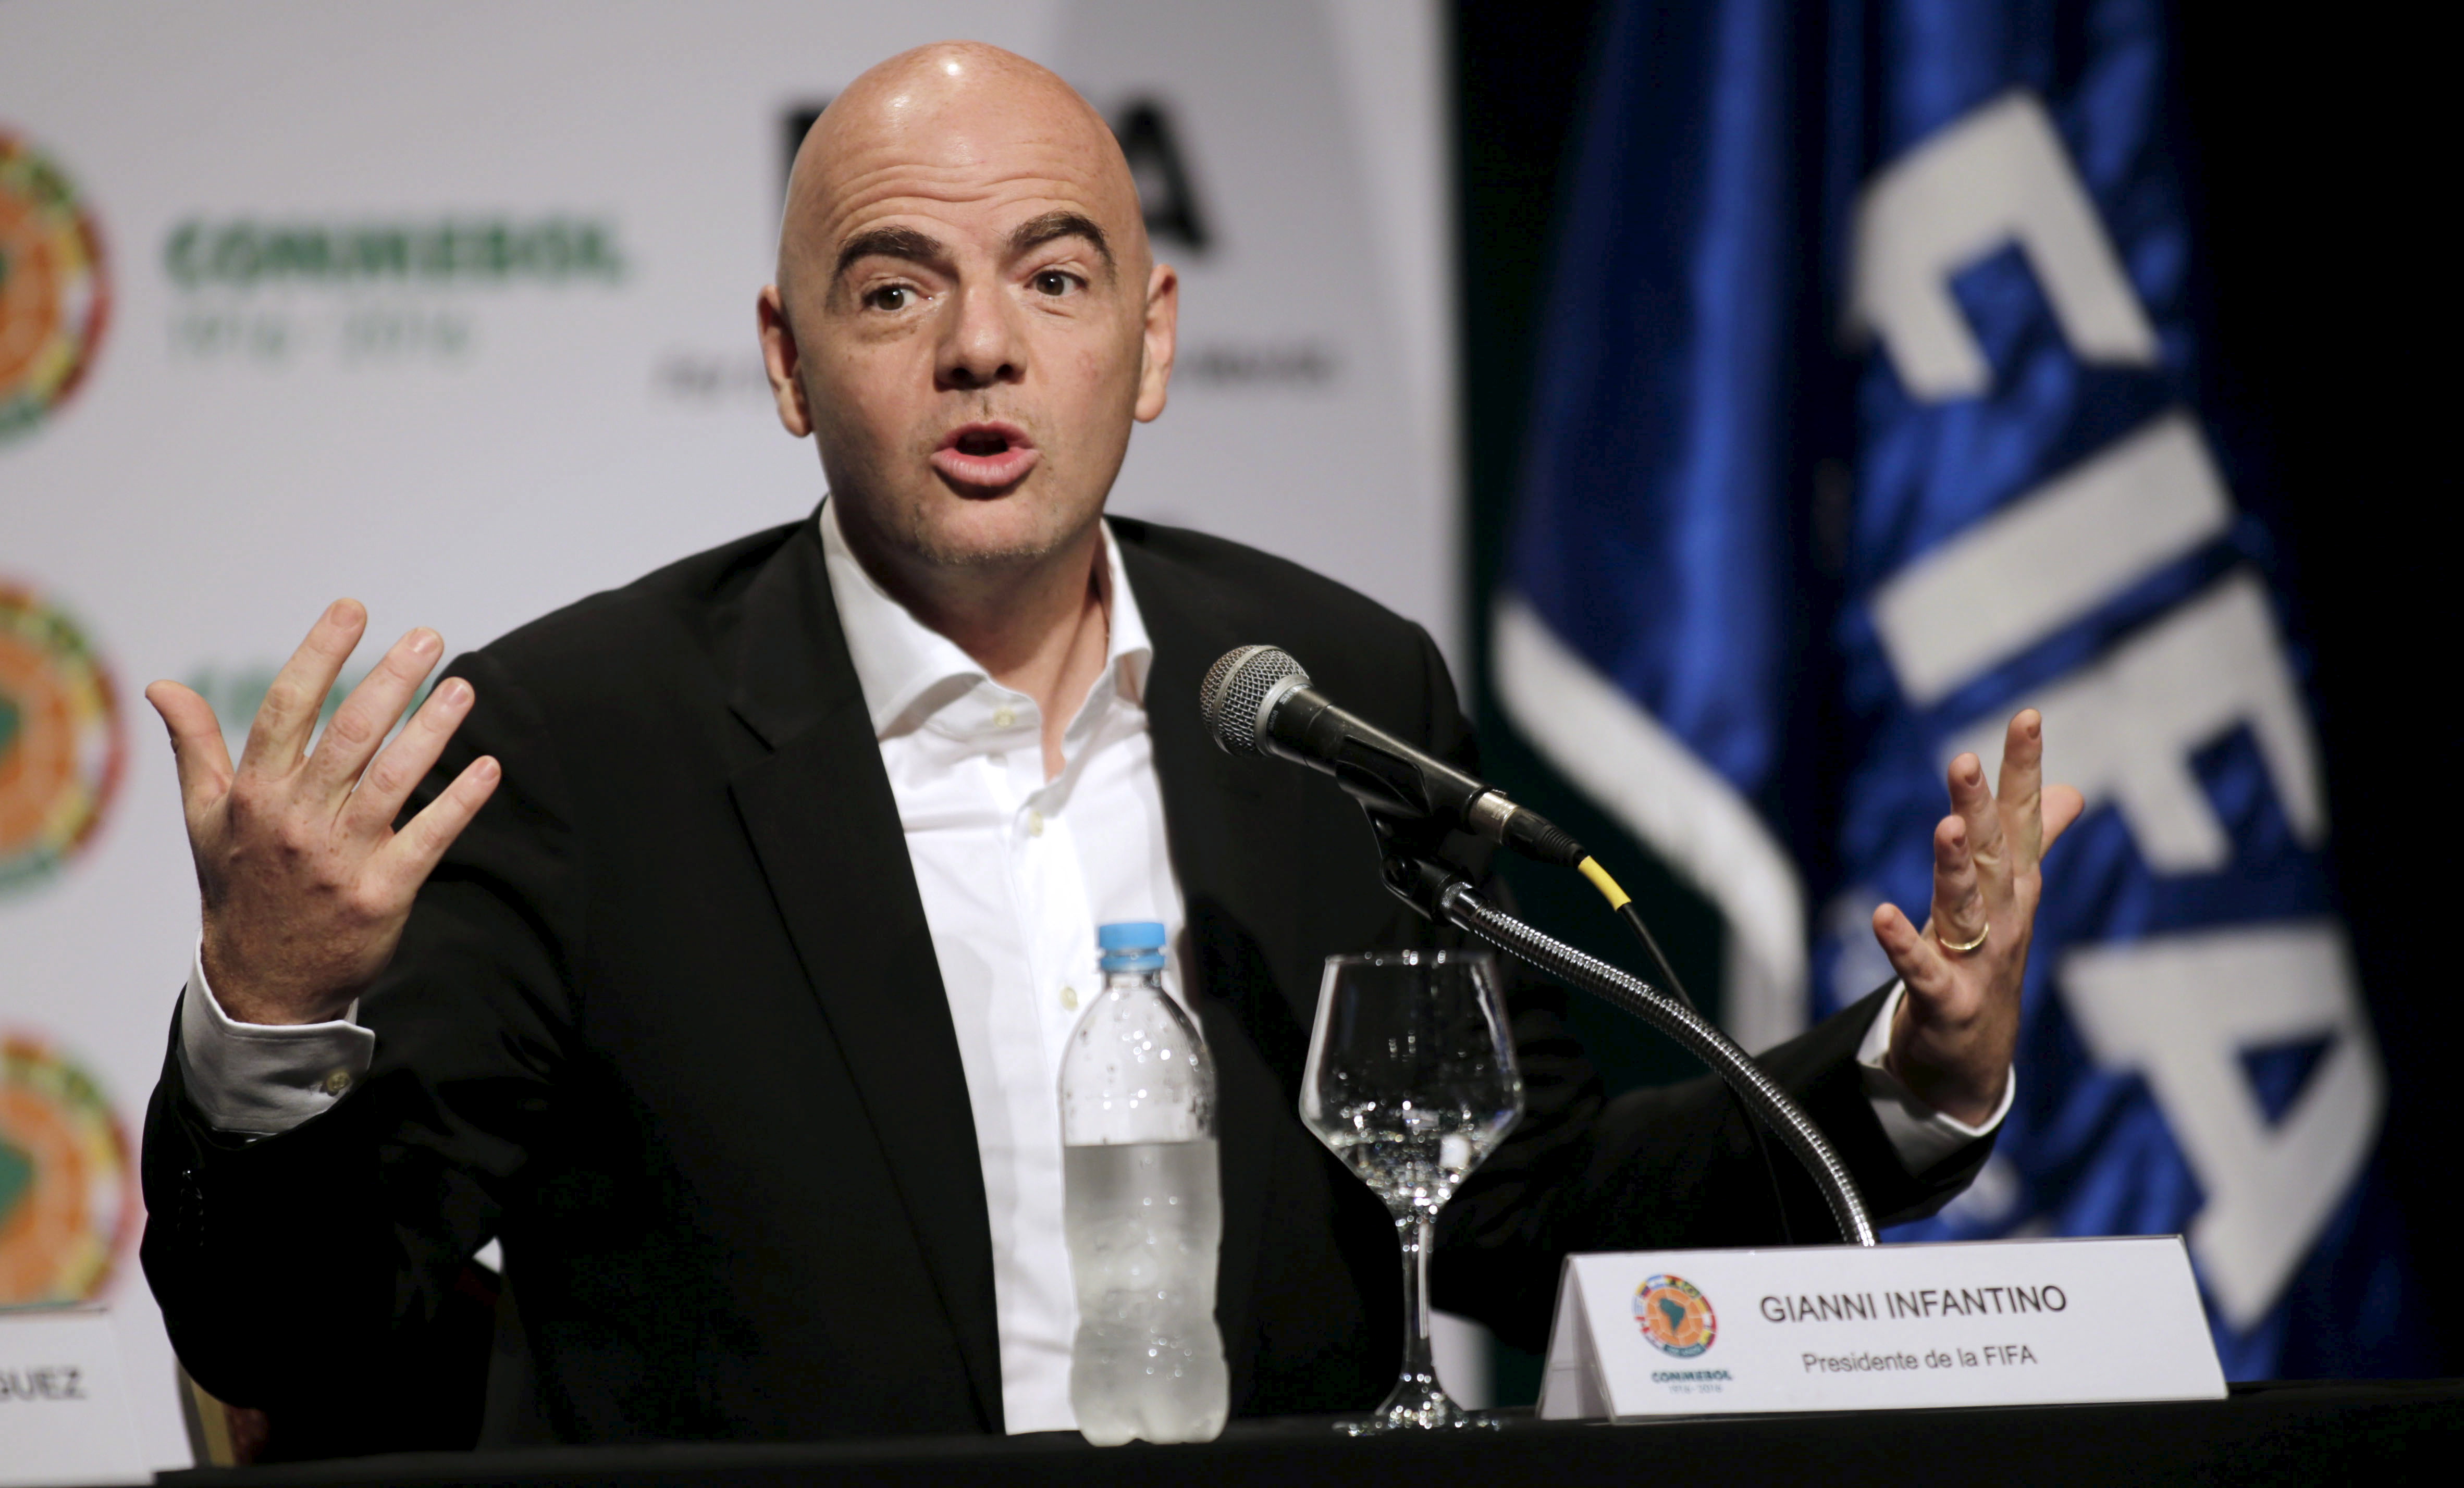 FIFA President Gianni Infantino speaks during a news conference at the South American Football Confderation (CONMEBOL) headquarters in Luque March 28, 2016. REUTERS/Jorge Adorno - RTSCK7U